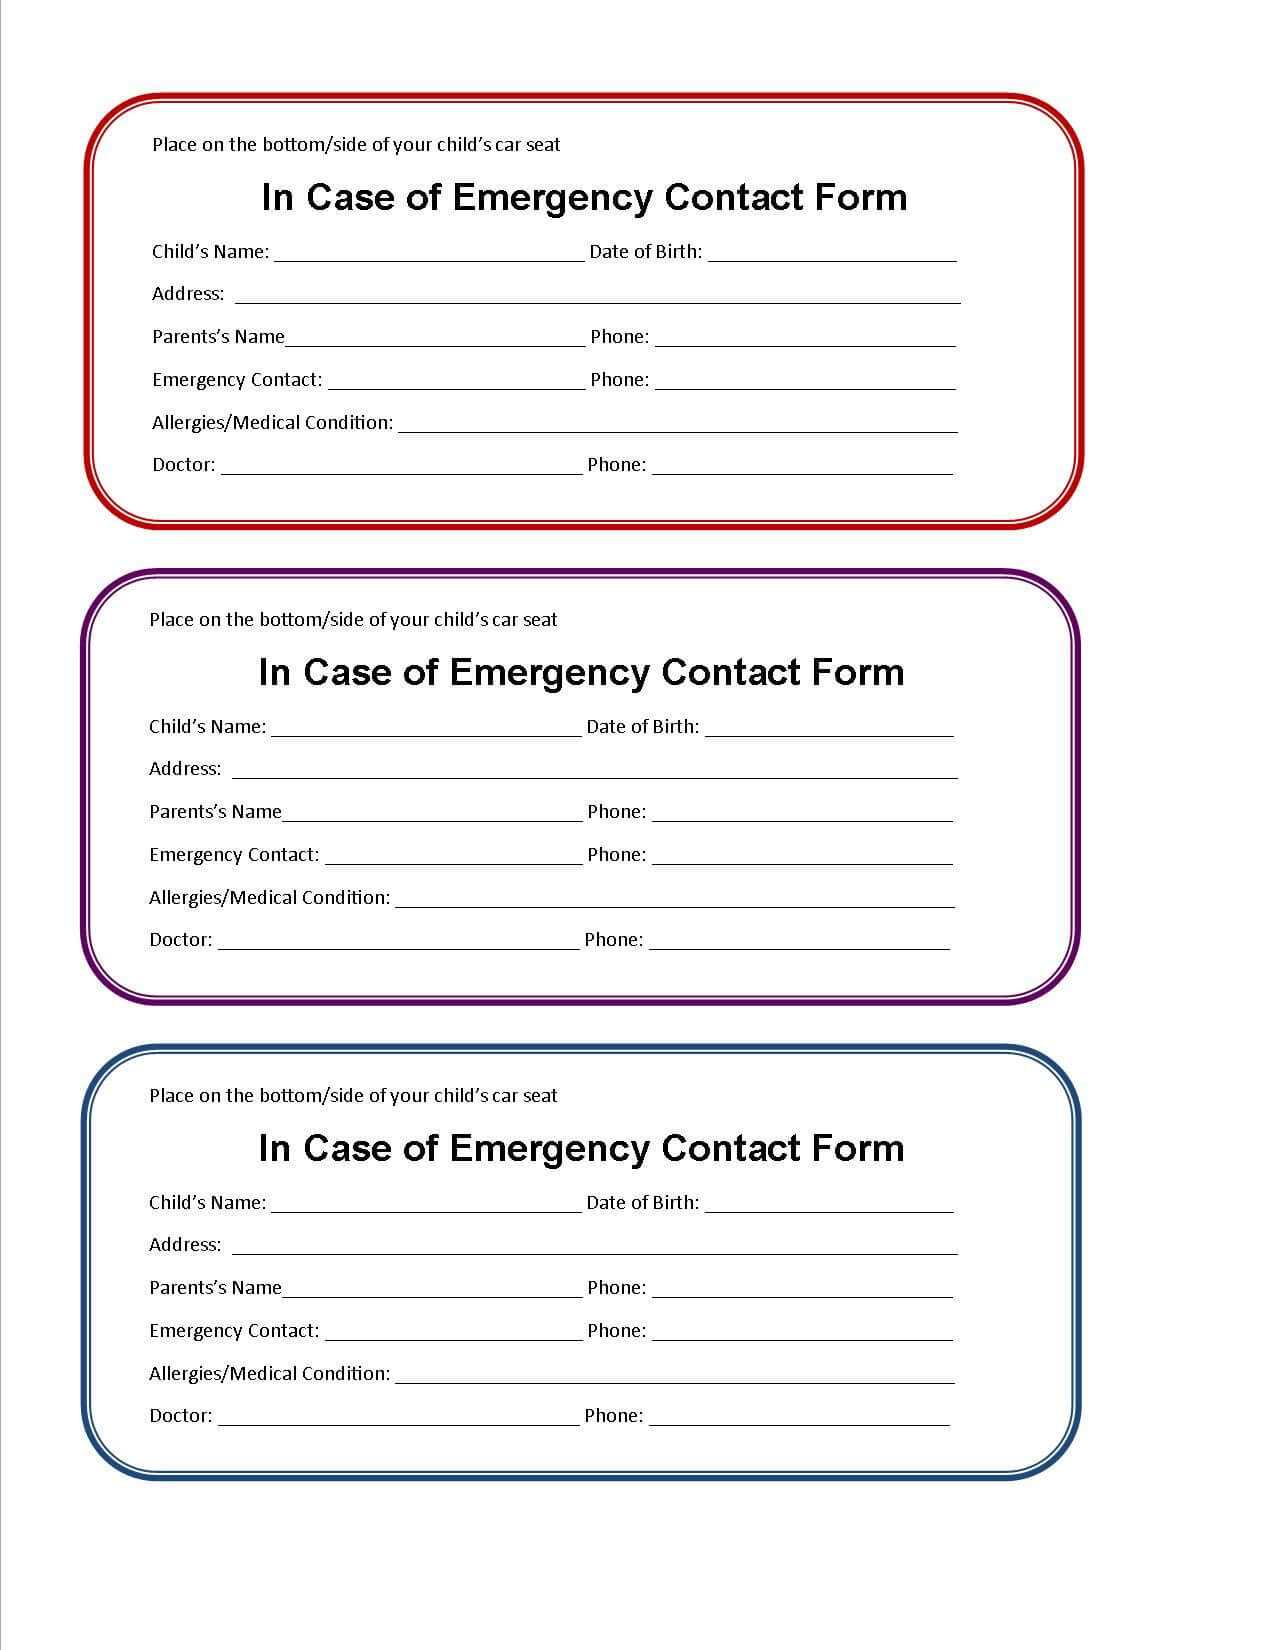 printable-emergency-contact-form-for-car-seat-emergency-regarding